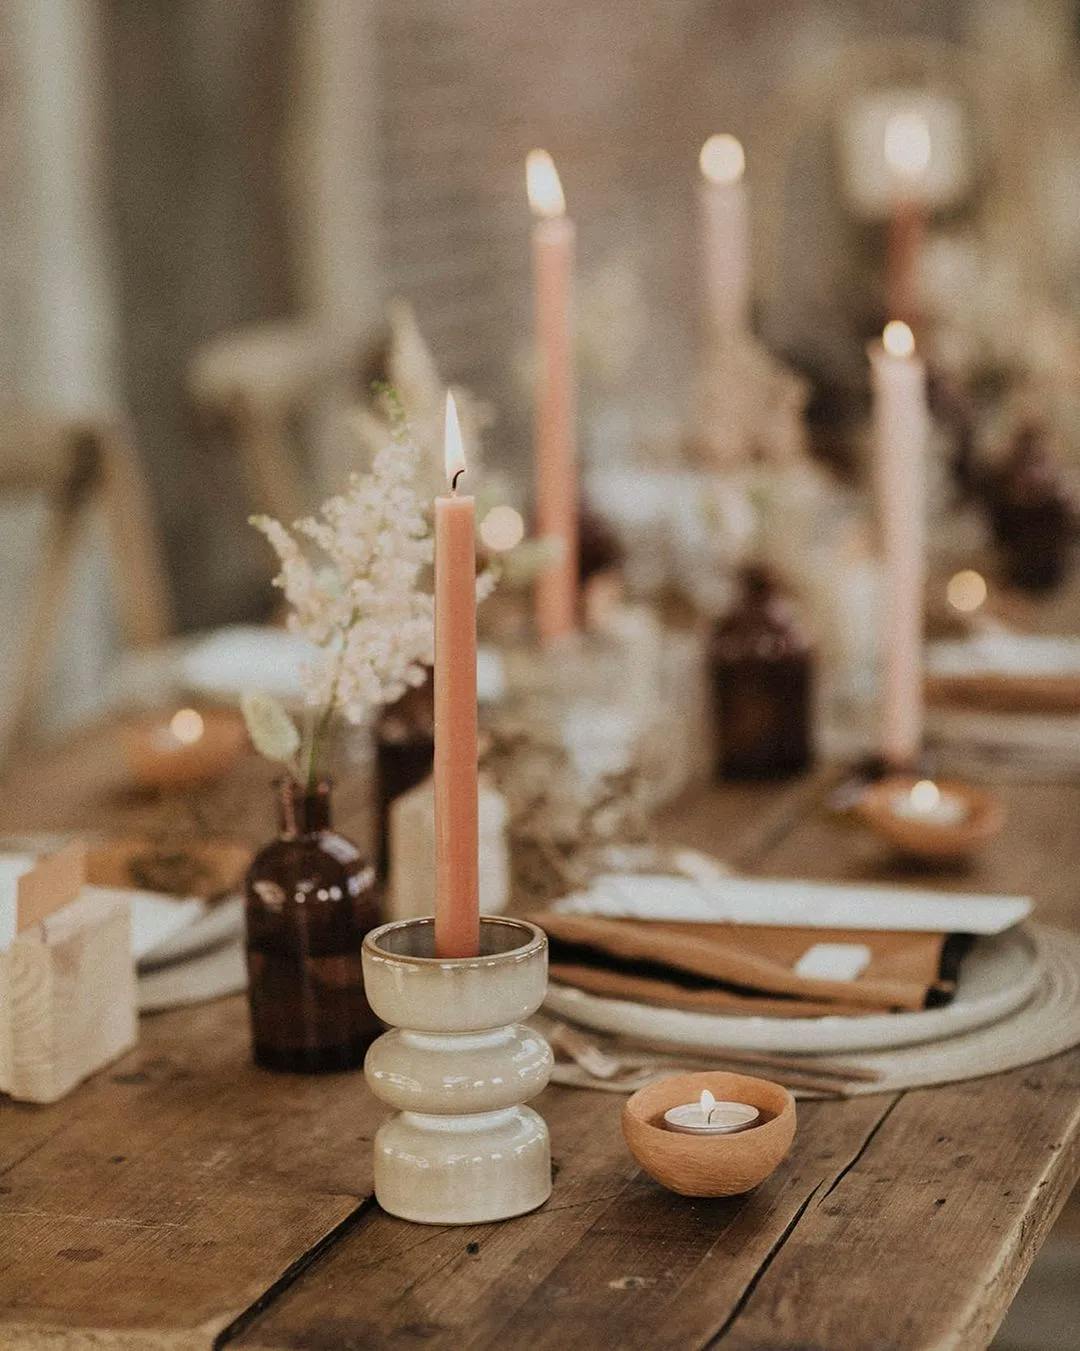 A rustic wooden table is adorned with lit pink candles in ceramic holders, small wooden bowls with tea lights, and delicate floral arrangements in small brown vases. The table setting includes earth-toned napkins and plates, creating a warm and inviting atmosphere.